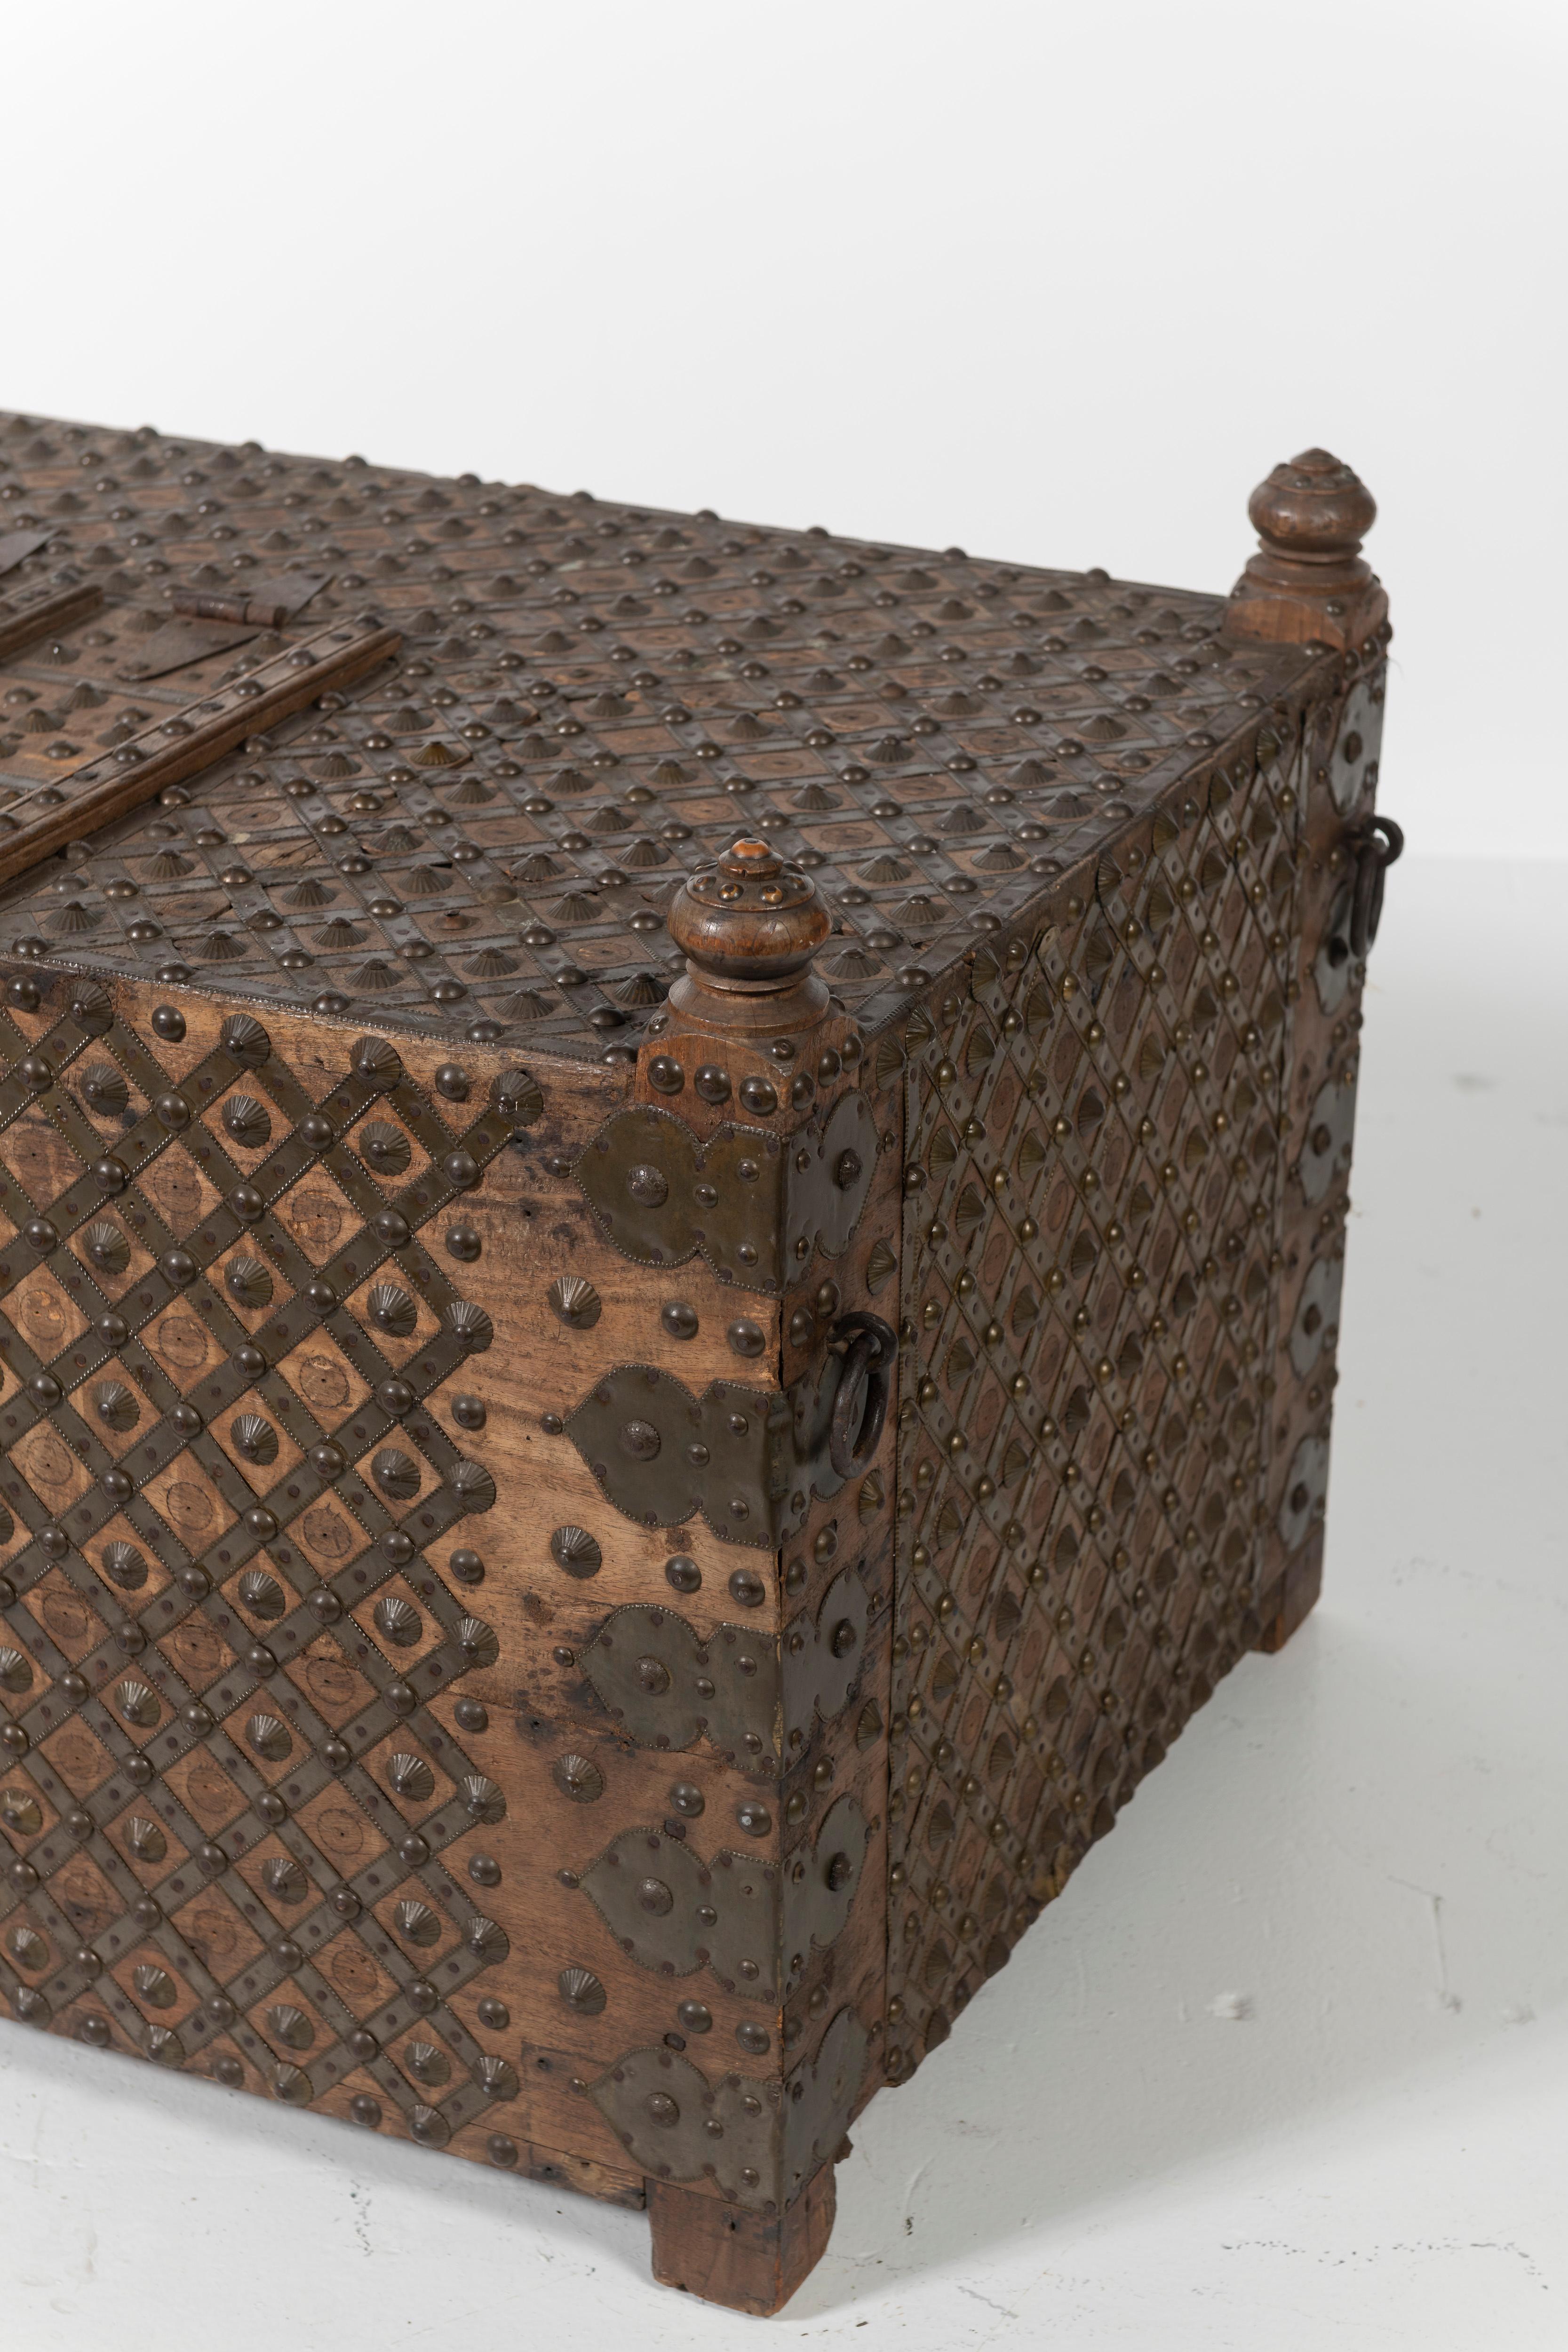 Of Indian origin, this beautiful teak trunk is wrapped in iron and studded with brass accents in an intricate yet simple pattern. Fully functional for storage or use as a coffee or cocktail table, the piece is in very good condition.